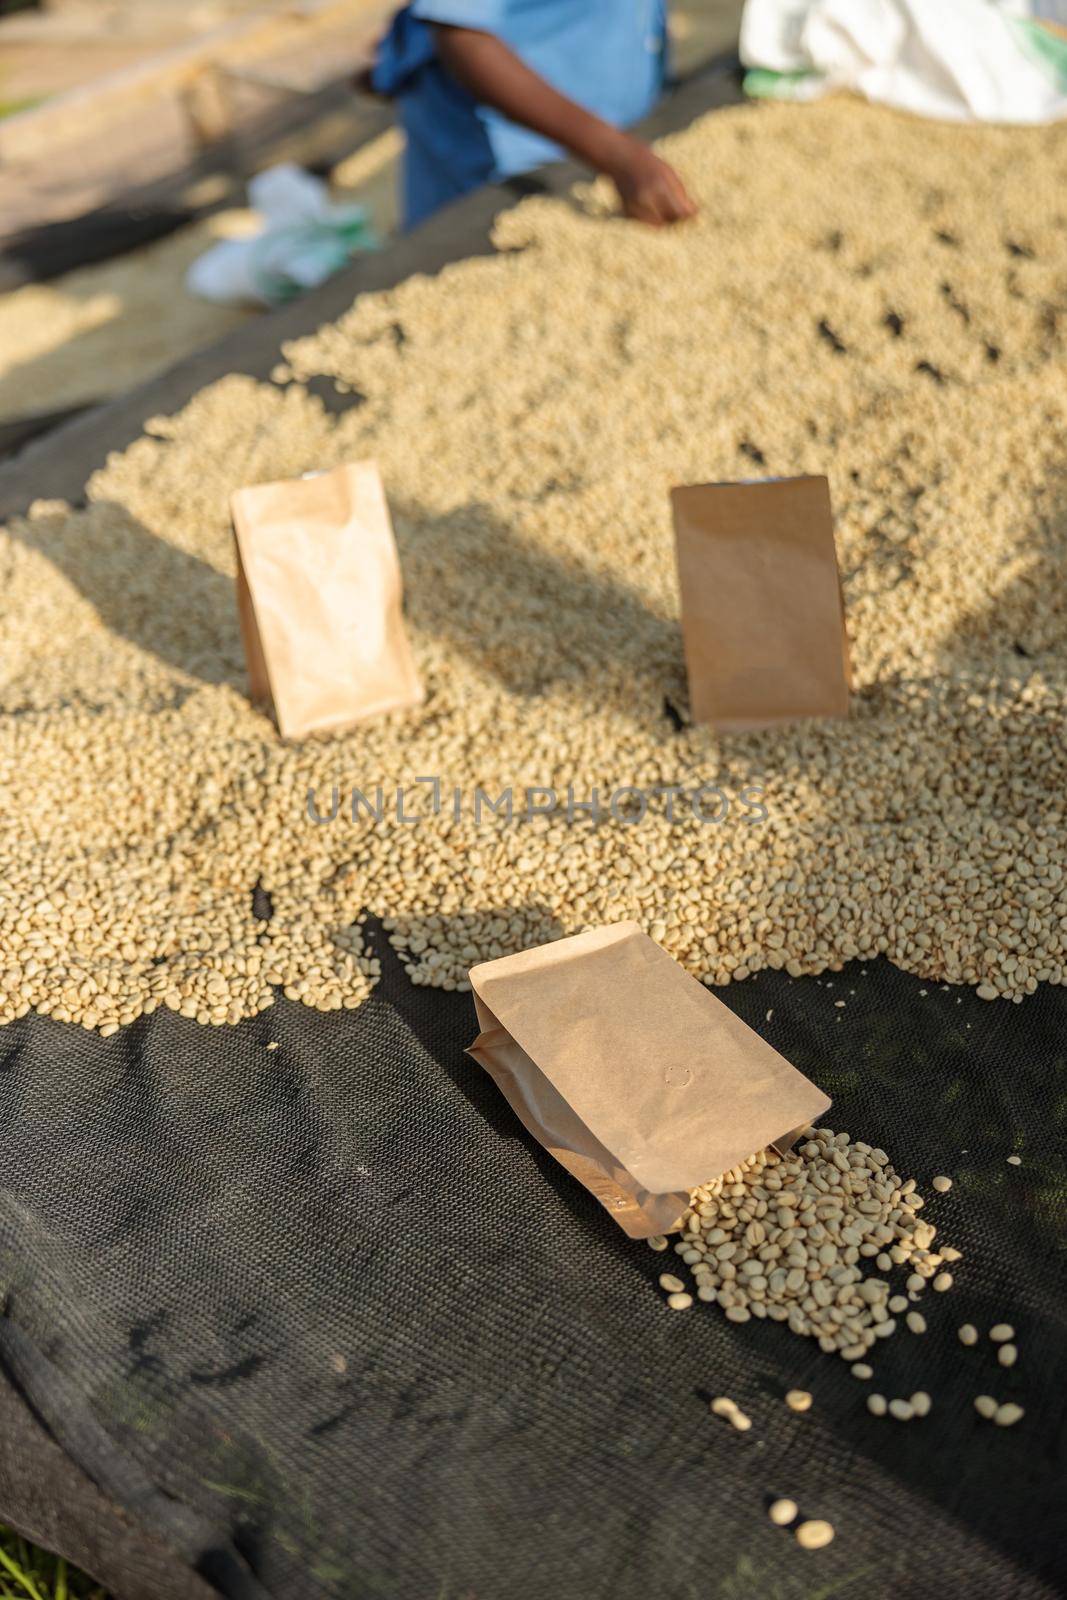 Paper bags with coffee located on the tables at the coffee washing station by Yaroslav_astakhov